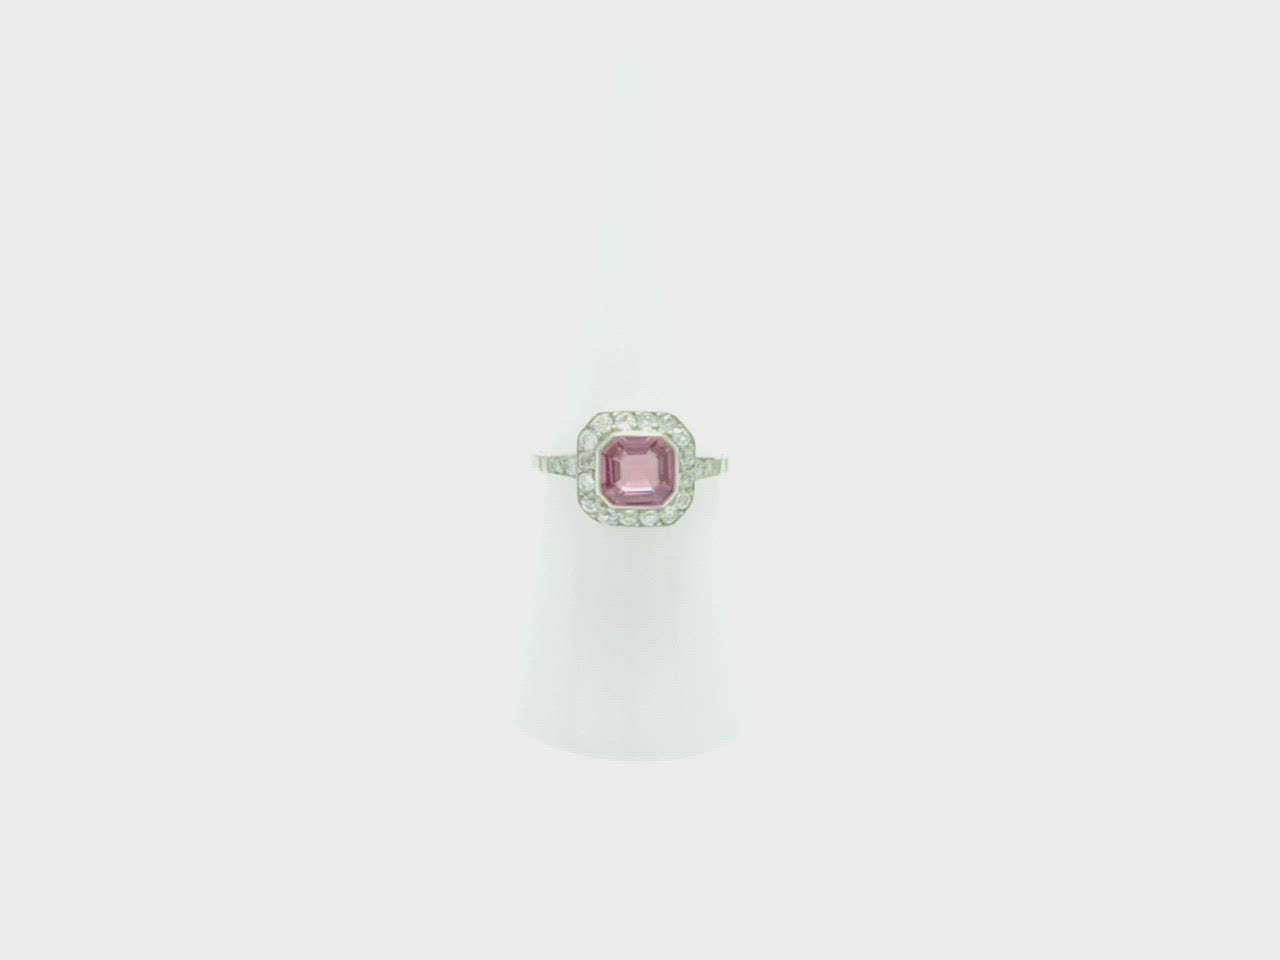 The halo of diamonds in this bridal ring display G - h color and vs clarity.